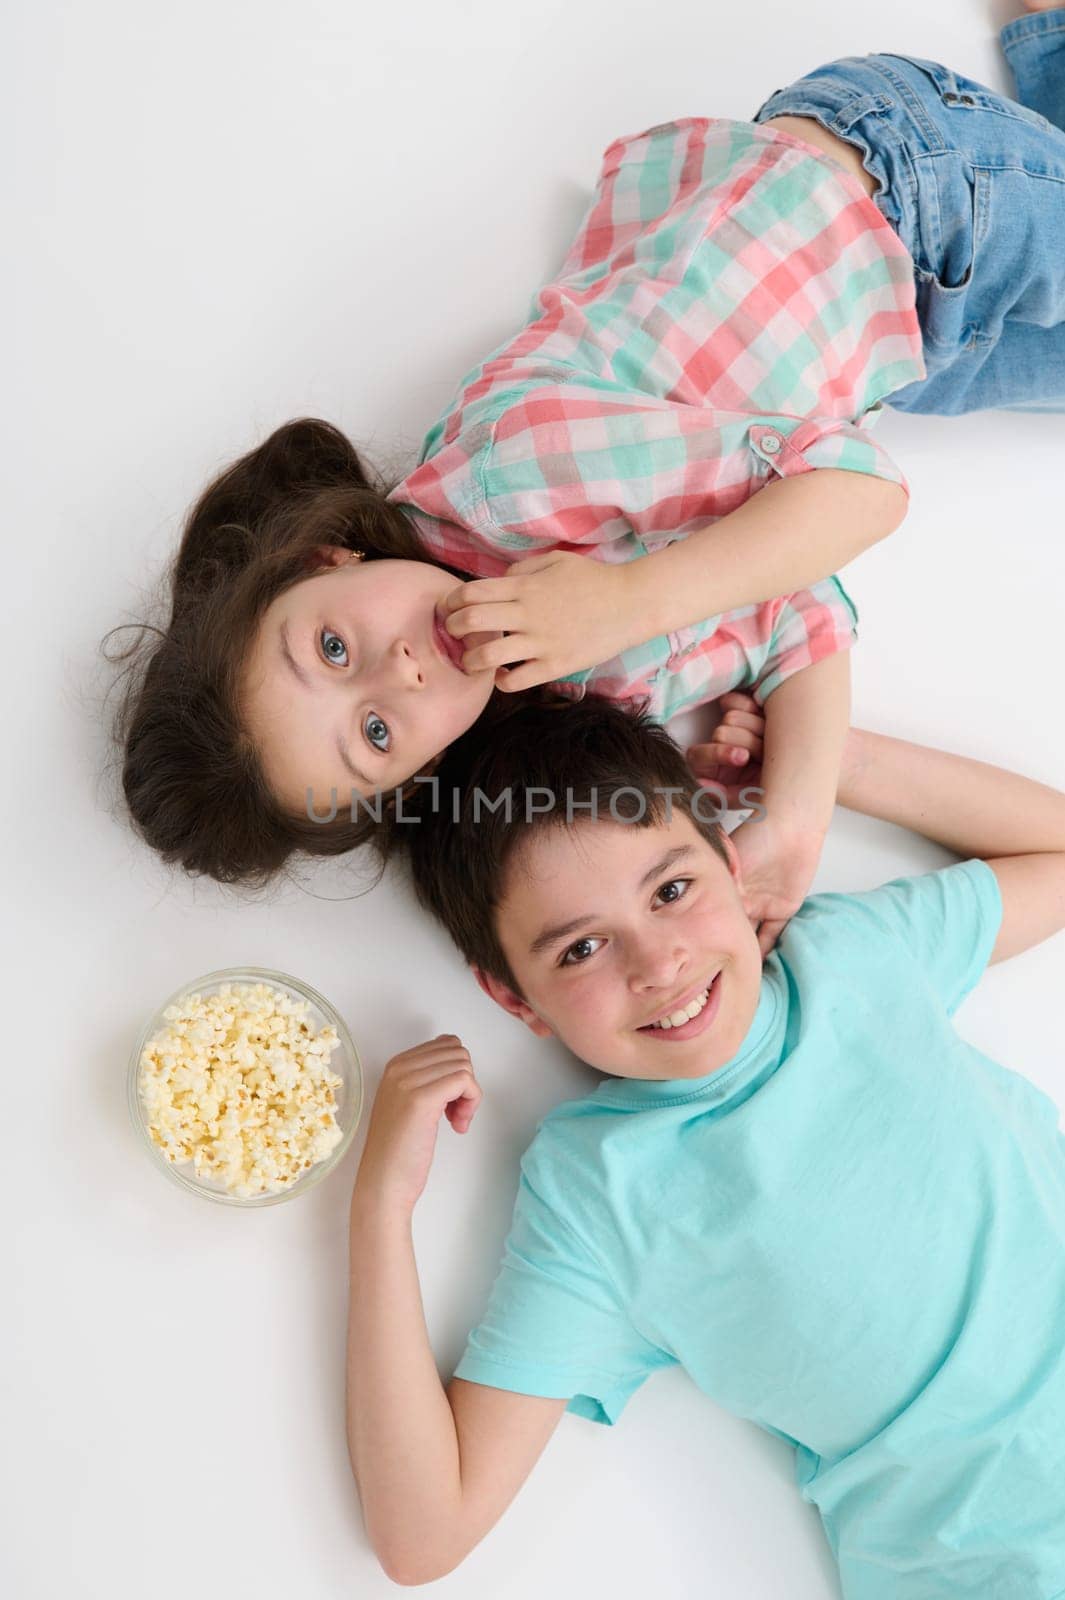 Top view happy kids smiling looking at camera, lying on their backs on white background near a bowl with tasty popcorn by artgf